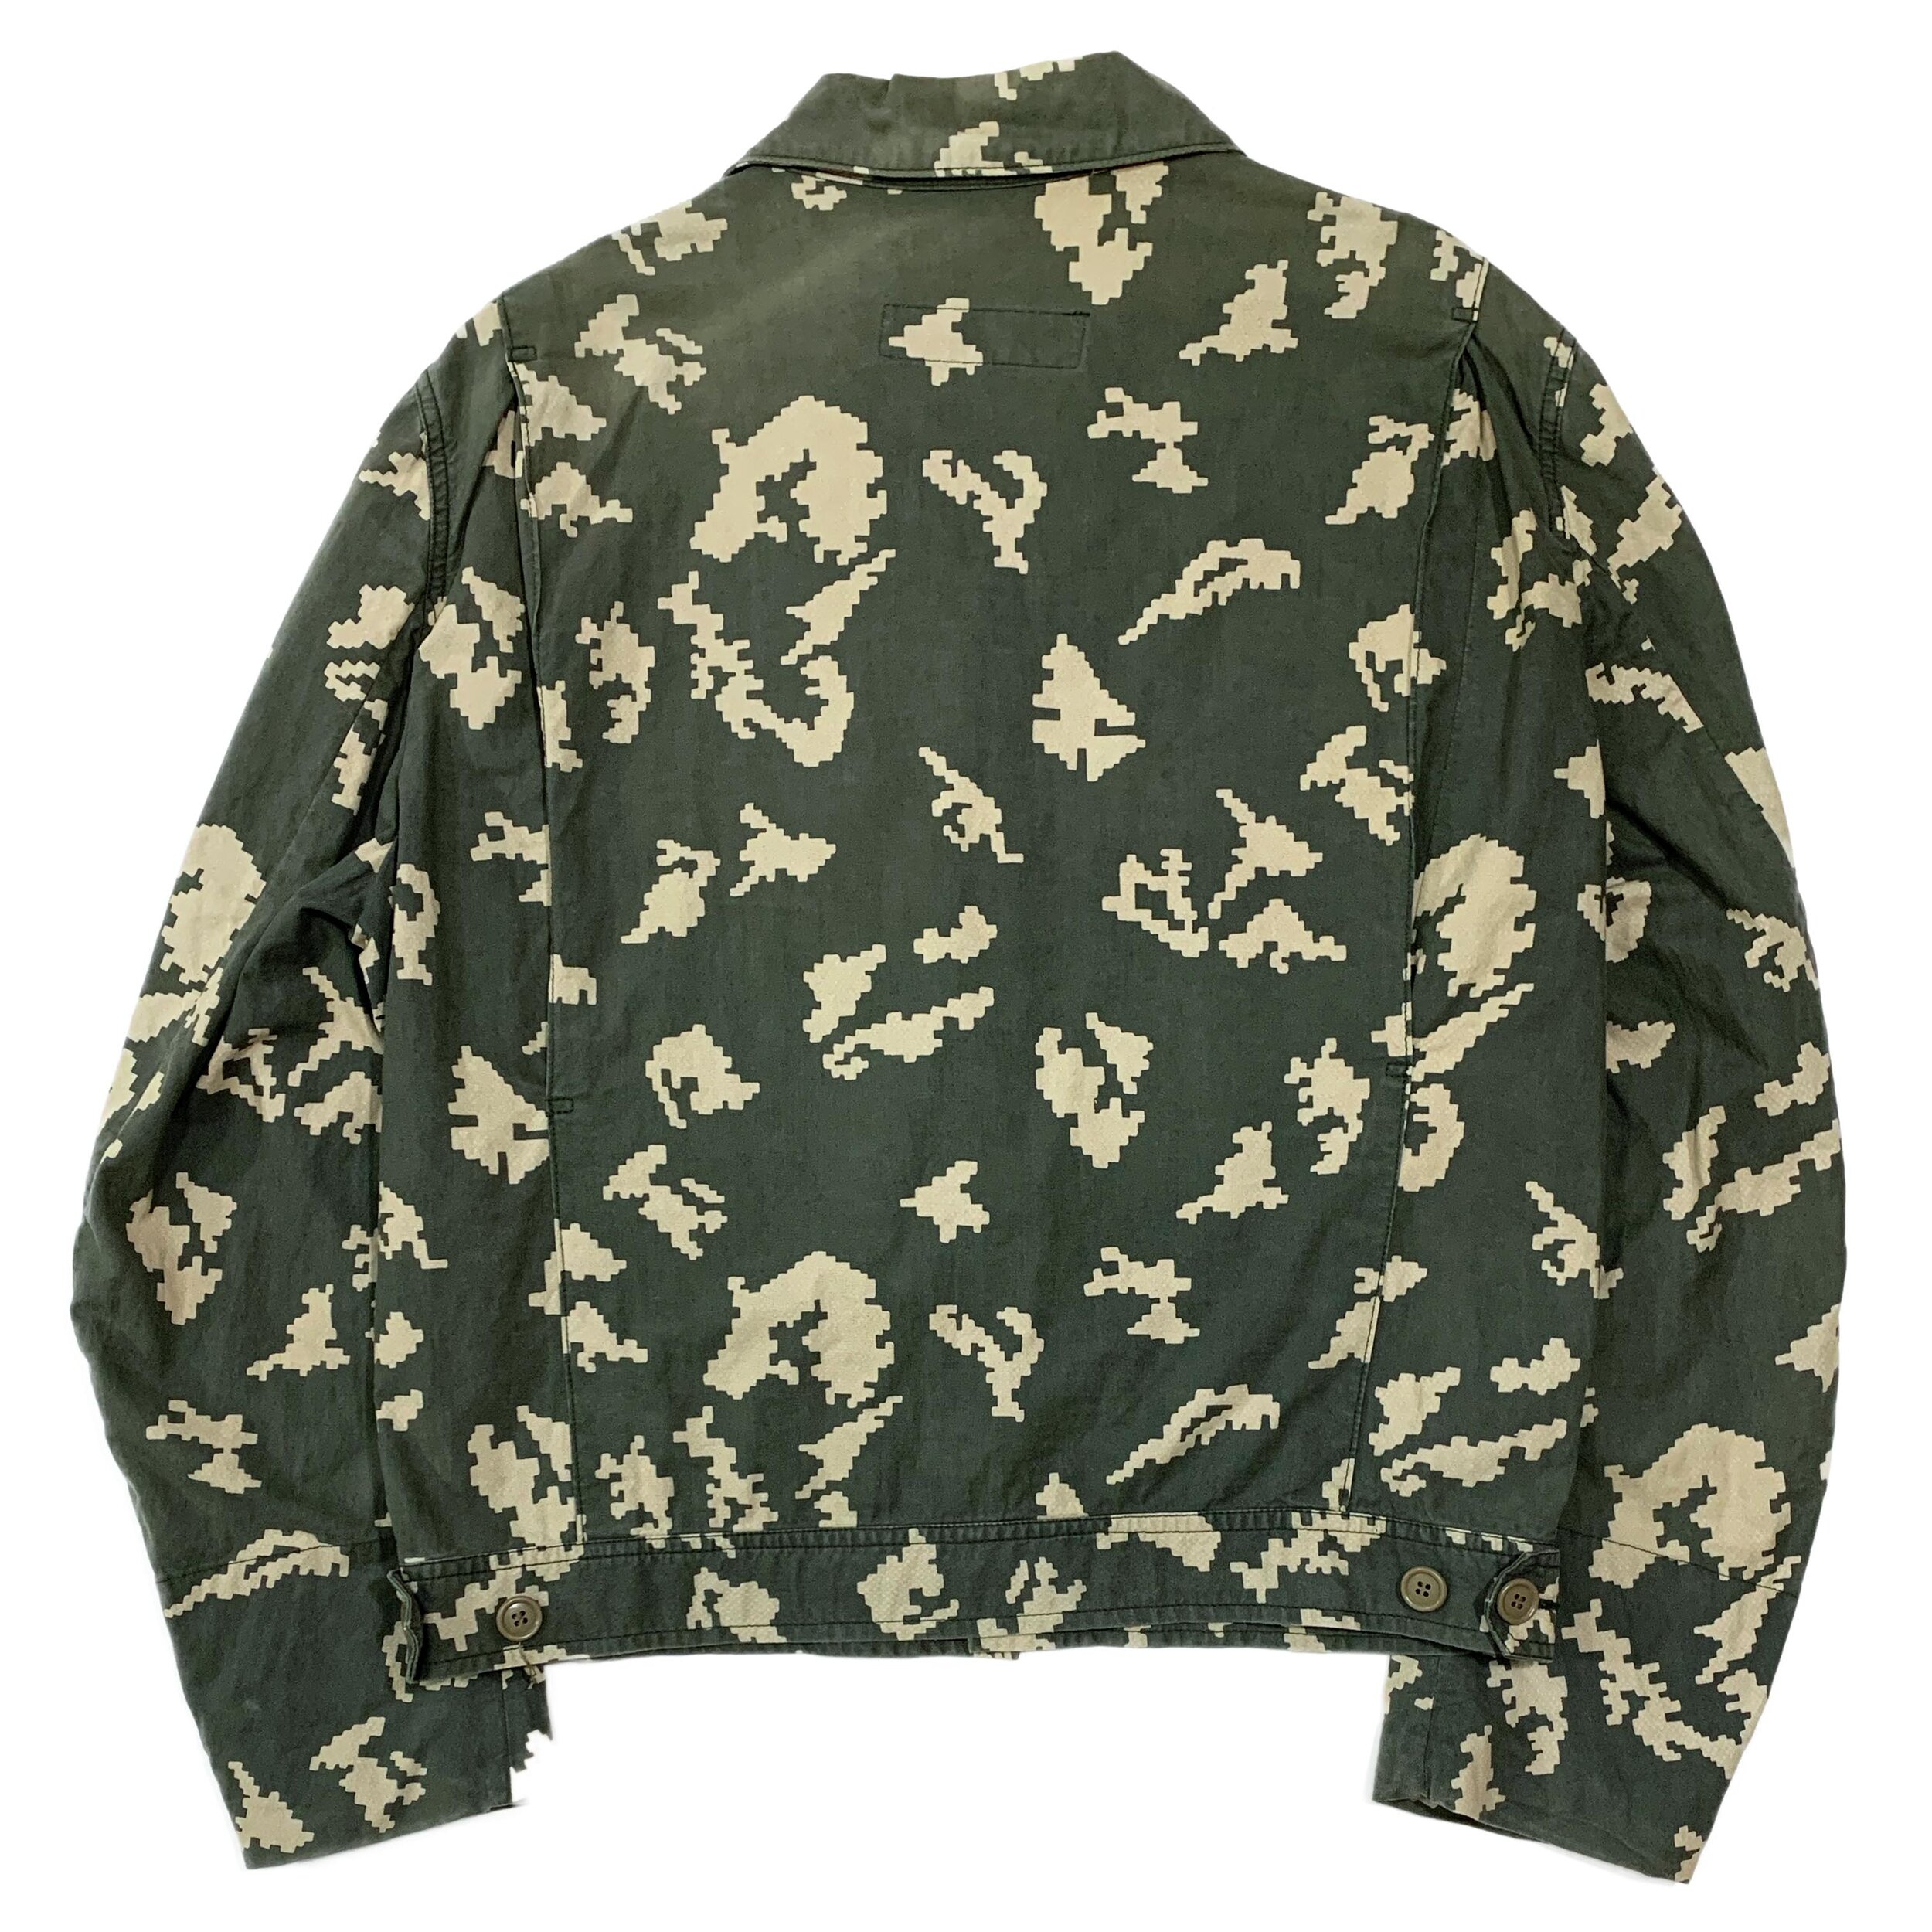 KLMK Camouflage Cotton Jacket — My Clothing Archive